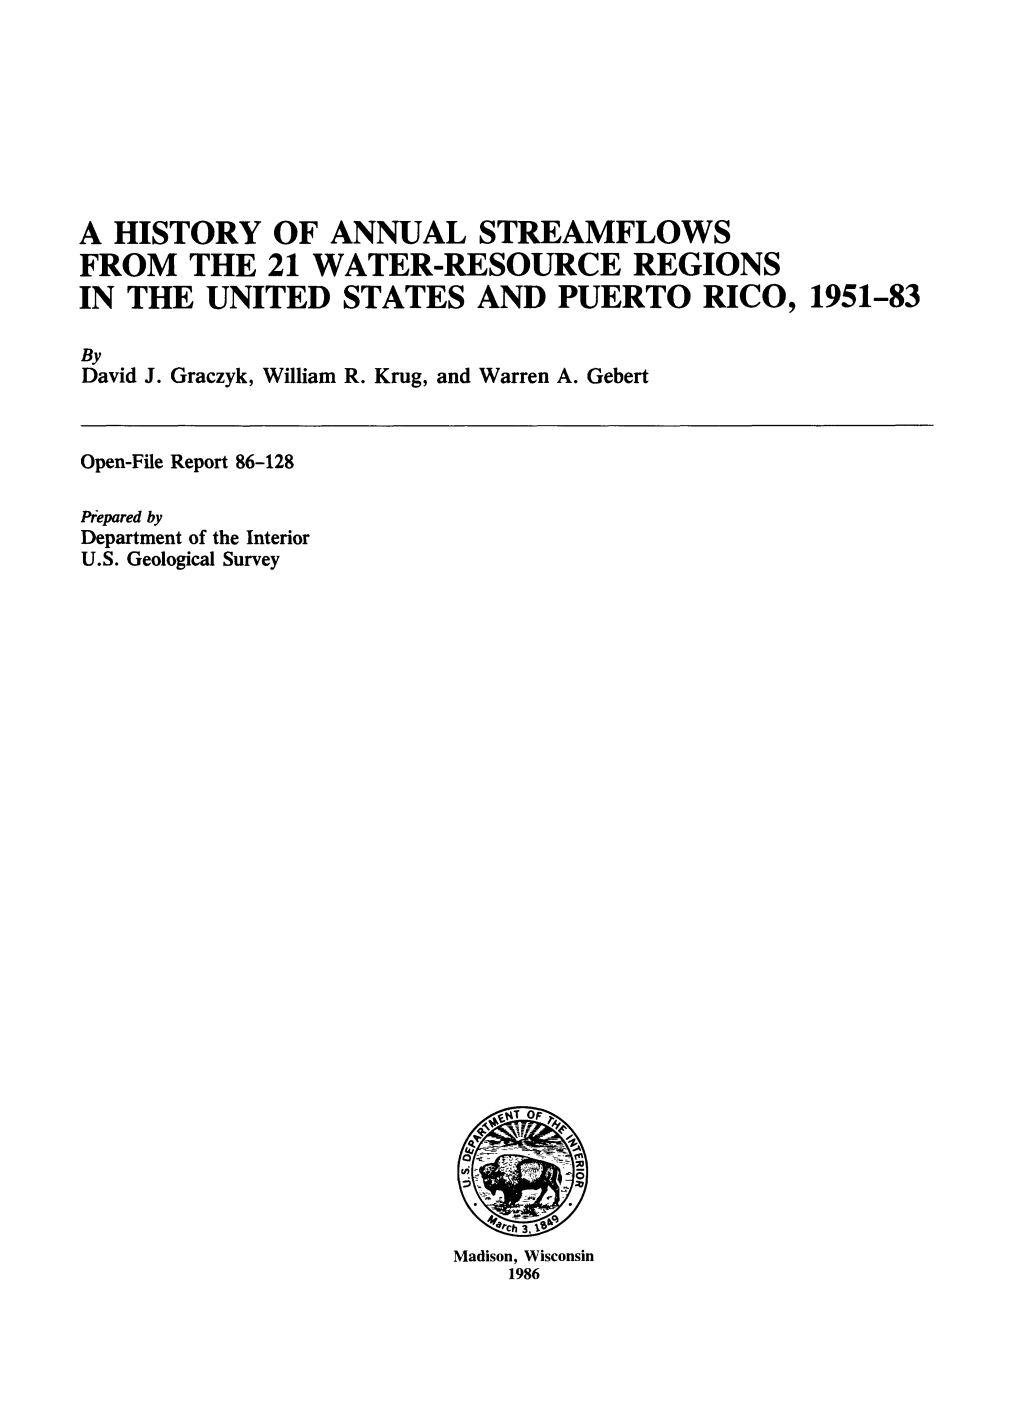 A History of Annual Streamflows from the 21 Water-Resource Regions in the United States and Puerto Rico, 1951-83